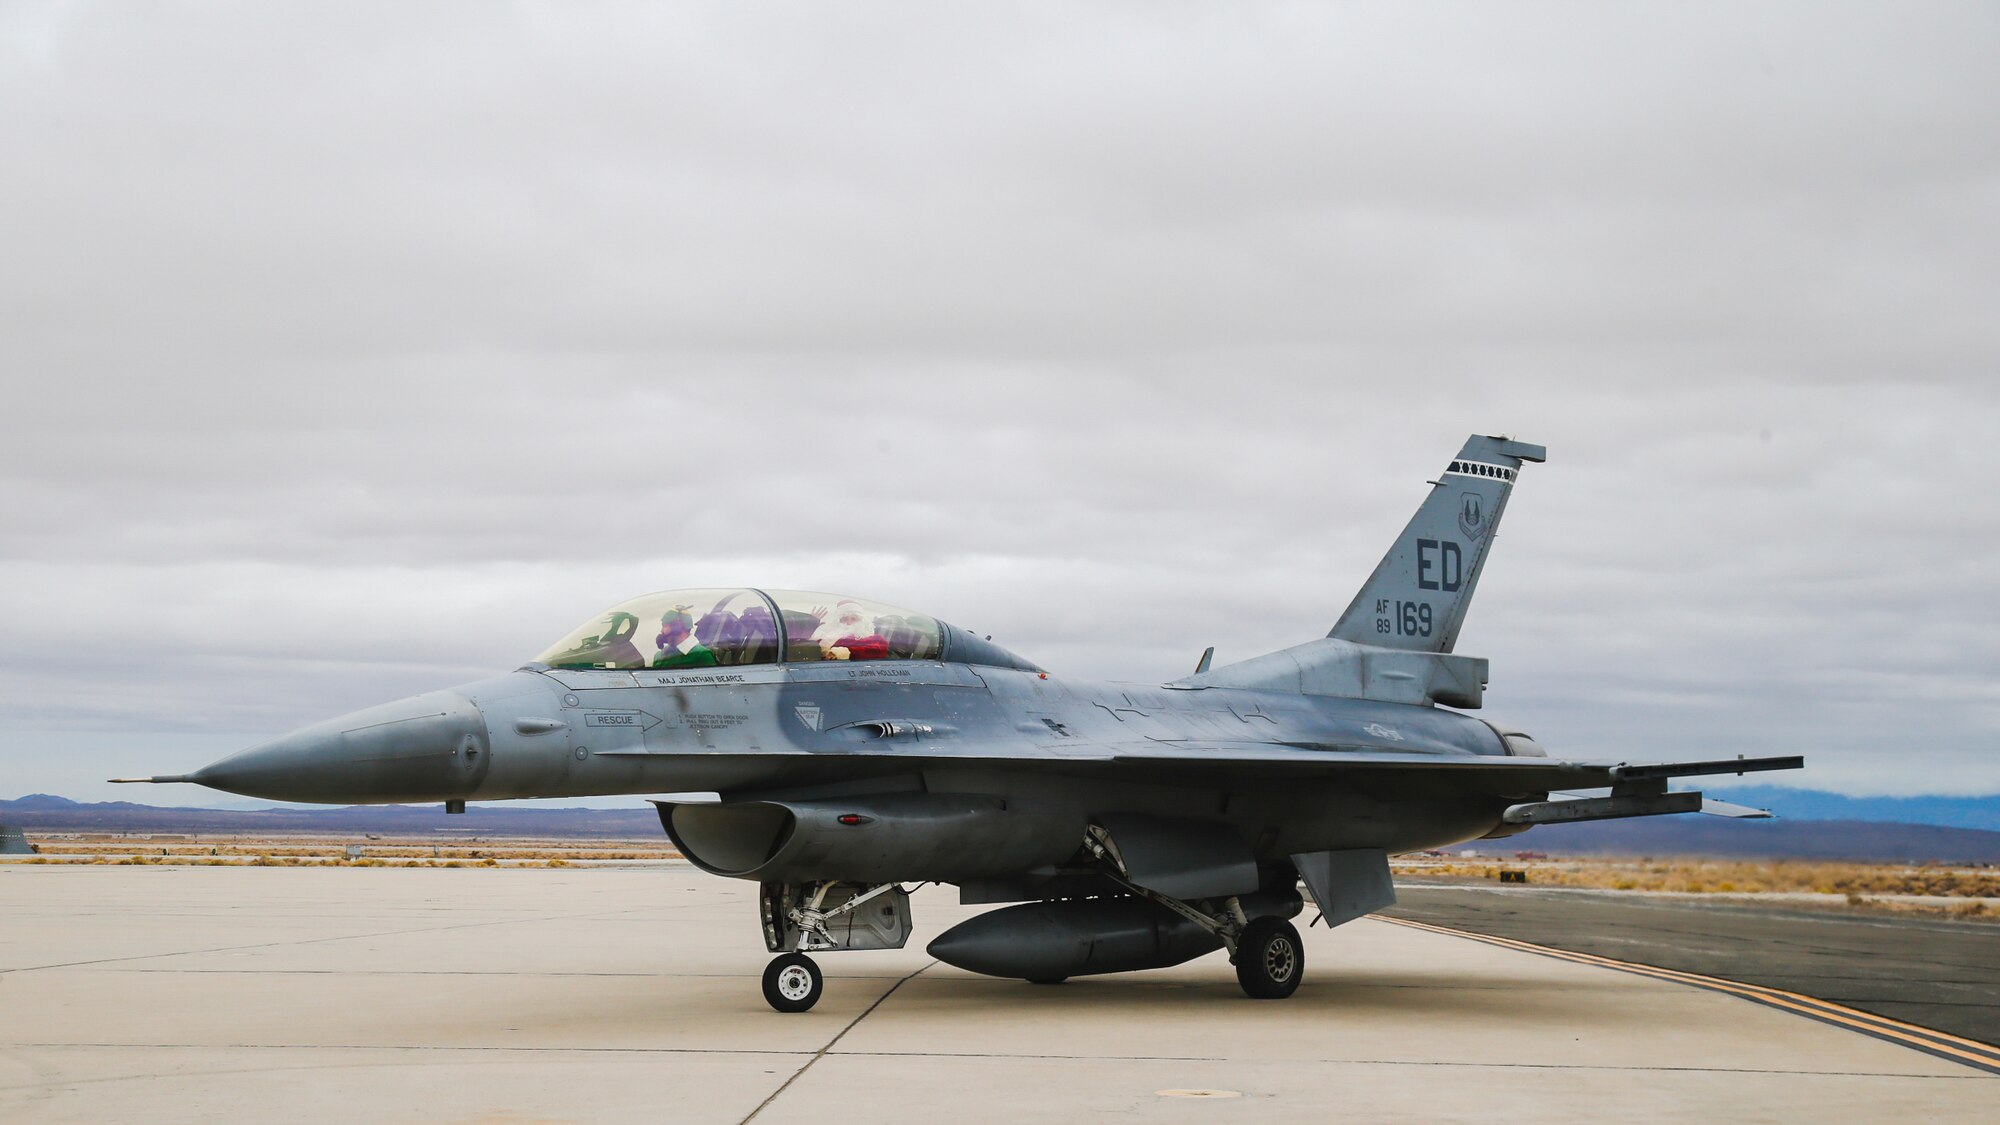 Instead of reindeer, Santa Claus comes to town... on an F-16! Santa Claus and one of his elves visited Edwards Air Force Base on an F-16 Fighting Falcon greeting base personnel and their families at a holiday party put on by the 416th Flight Test Squadron spreading holiday cheer on base... the Edwards style!